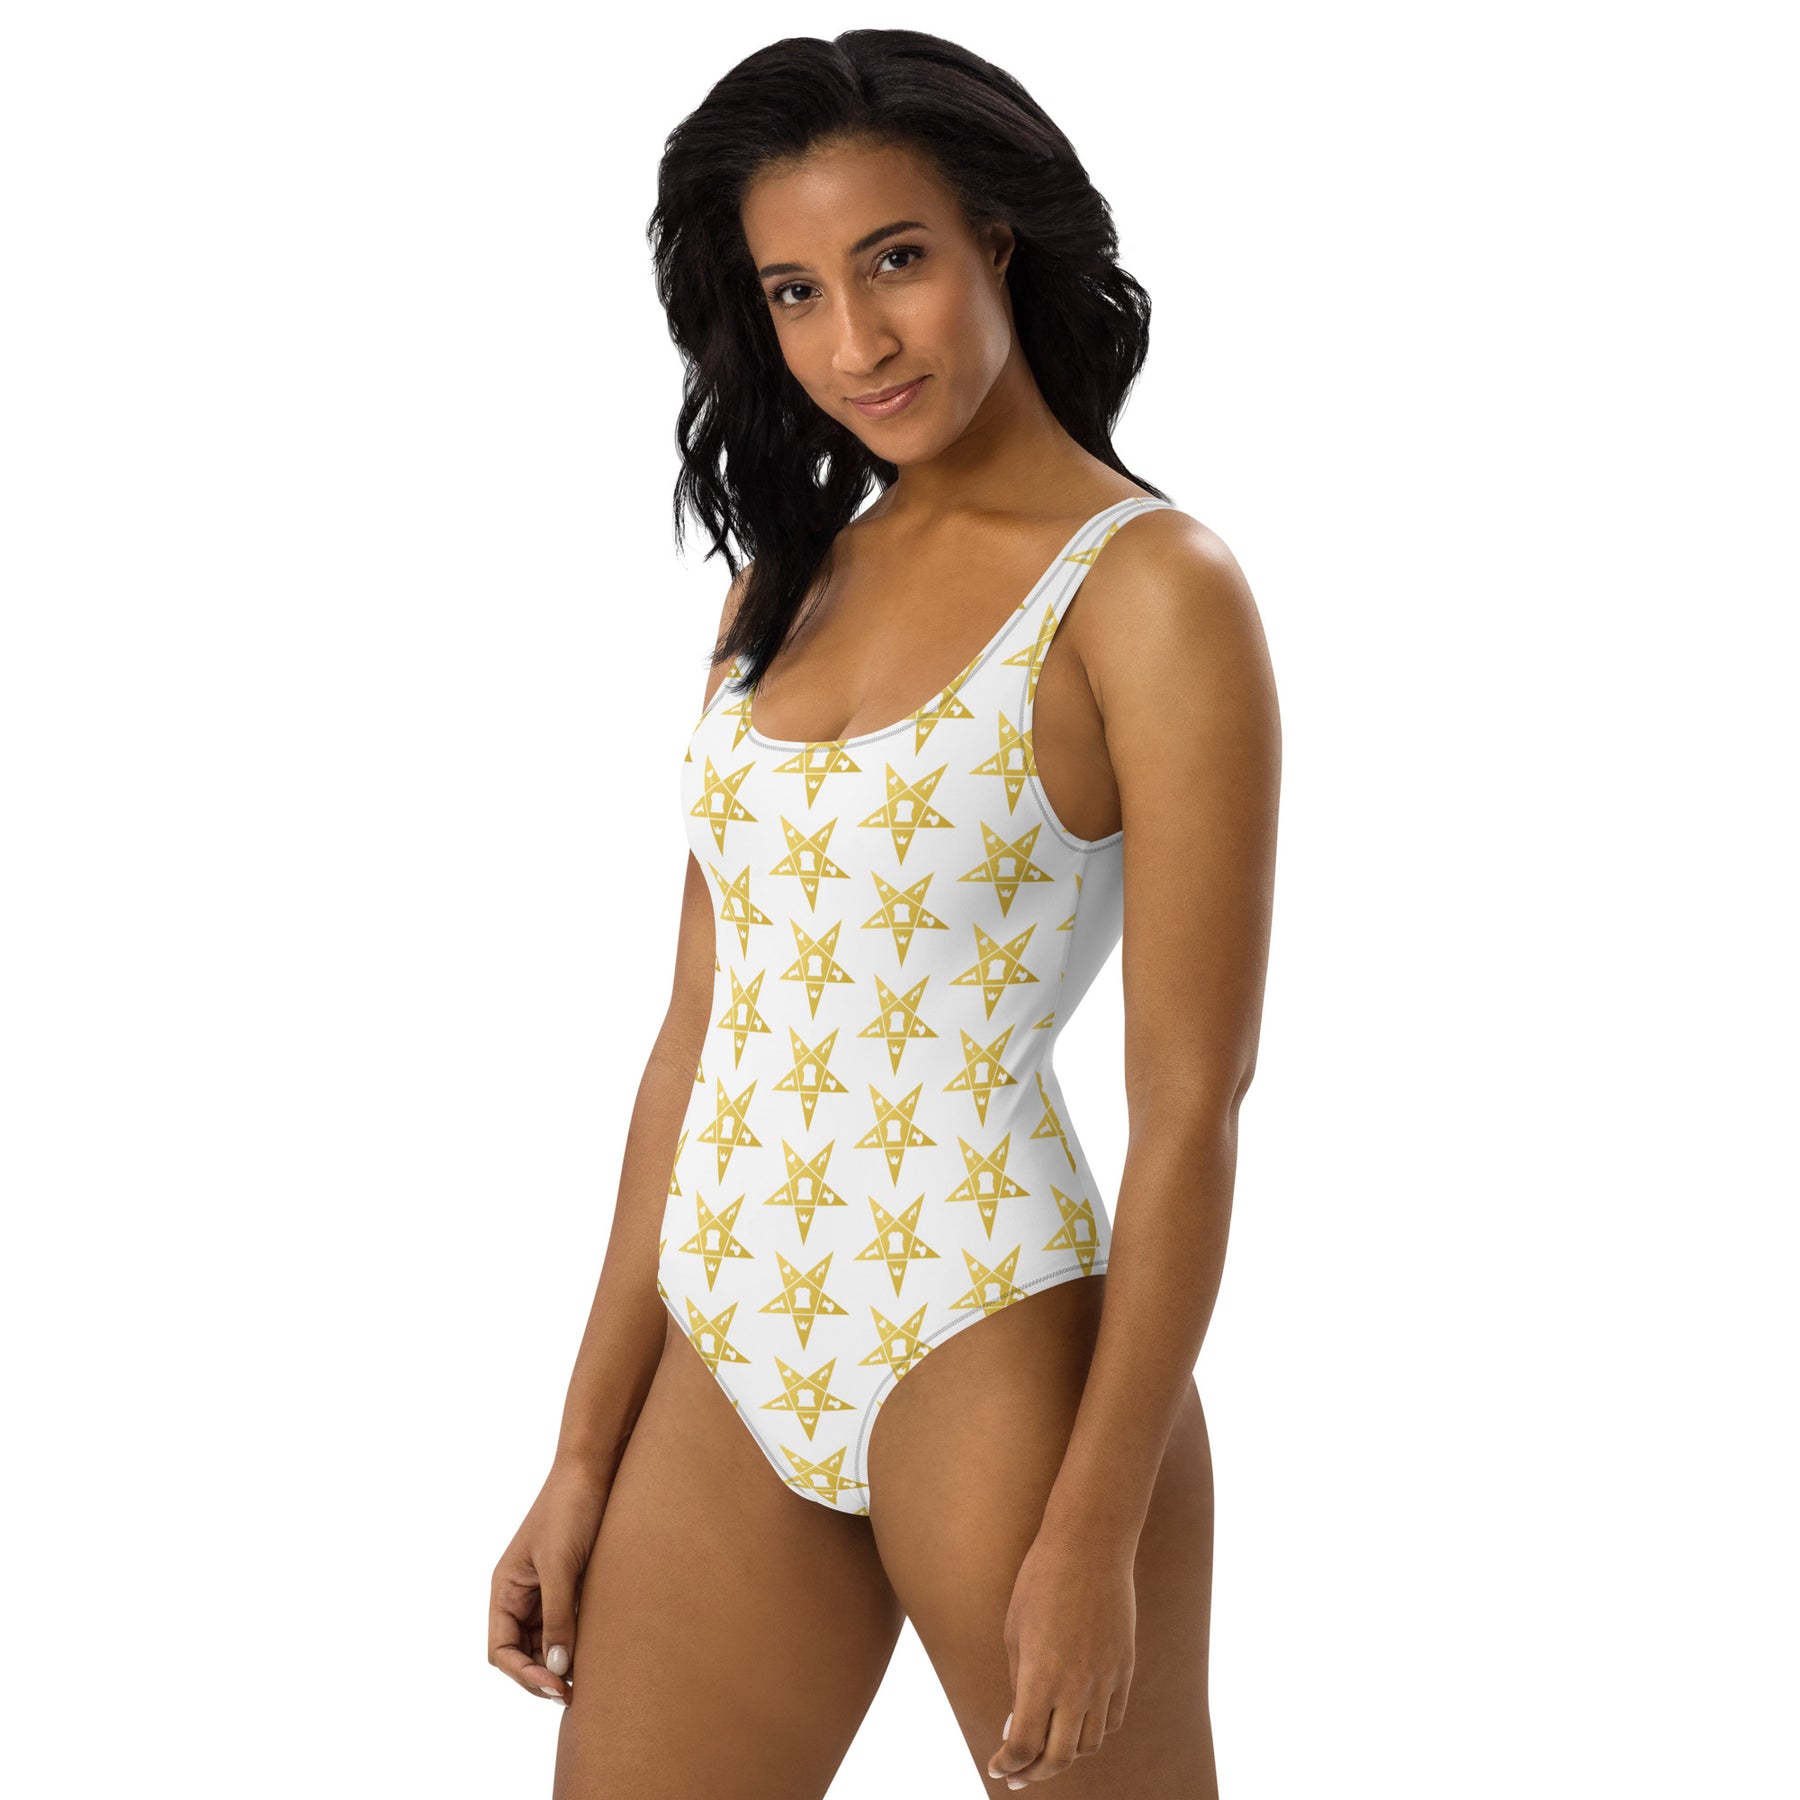 Order Of The Eastern Star OES Swimsuit - One-Piece - Bricks Masons